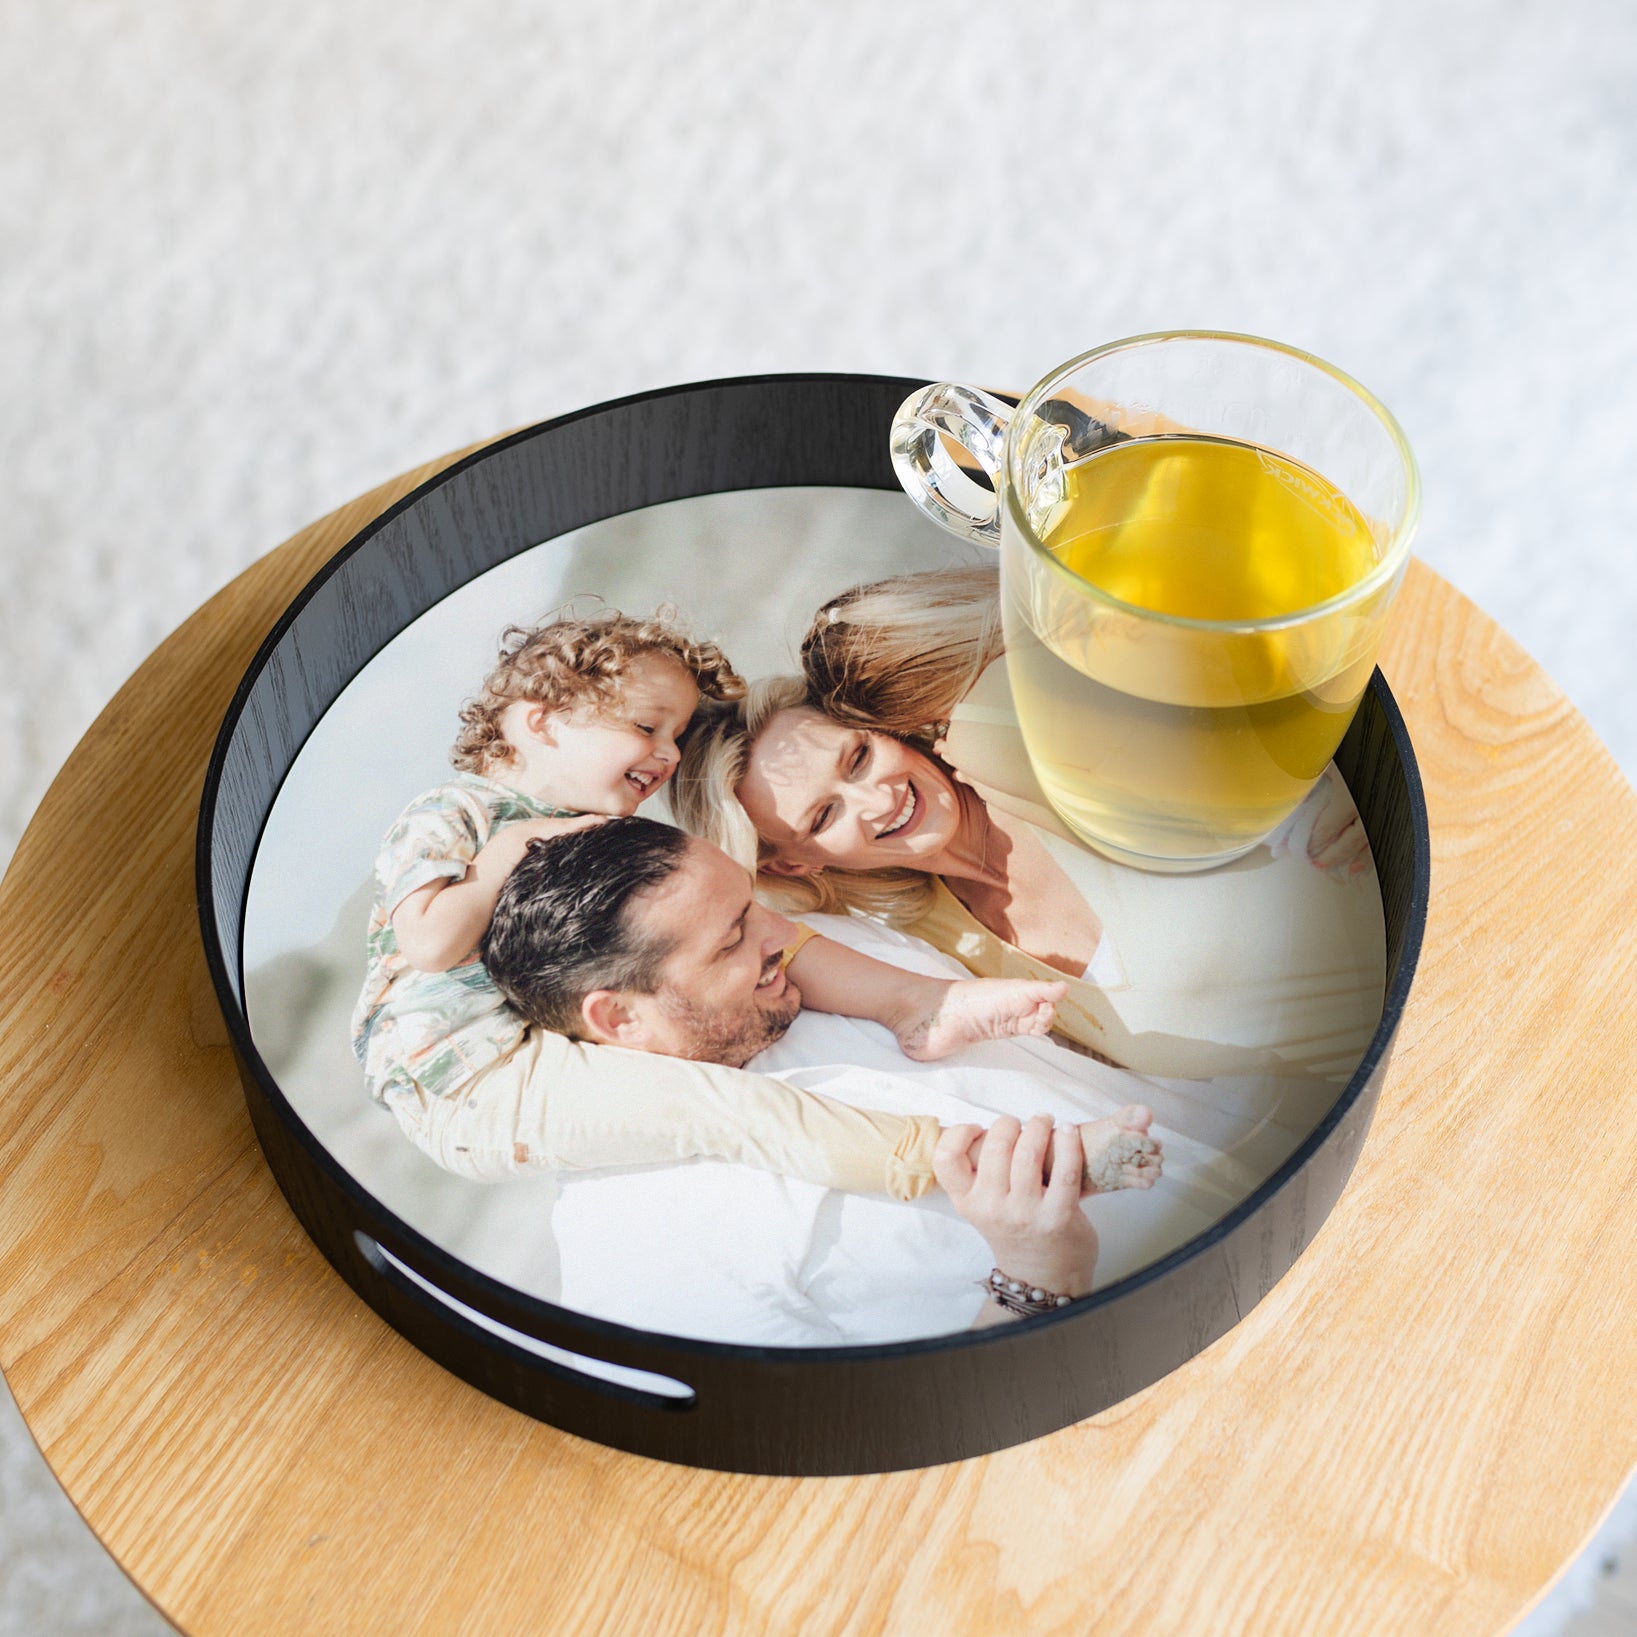 Personalised serving tray - Round - Black - 30 cm